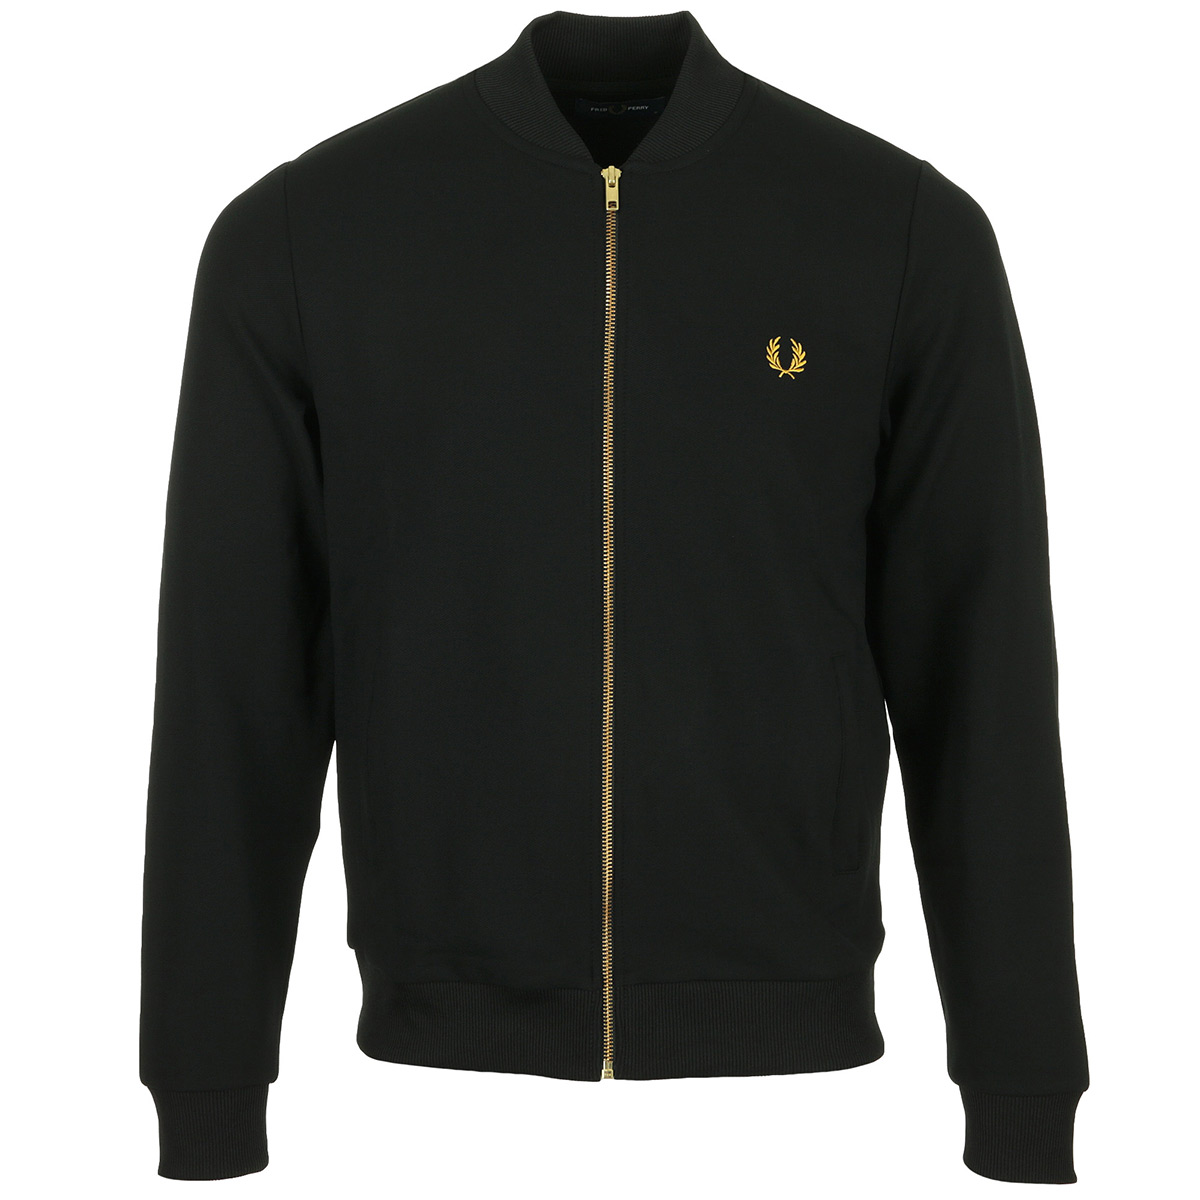 Fred Perry Twill Track Jacket J8541102, Vestes sport homme